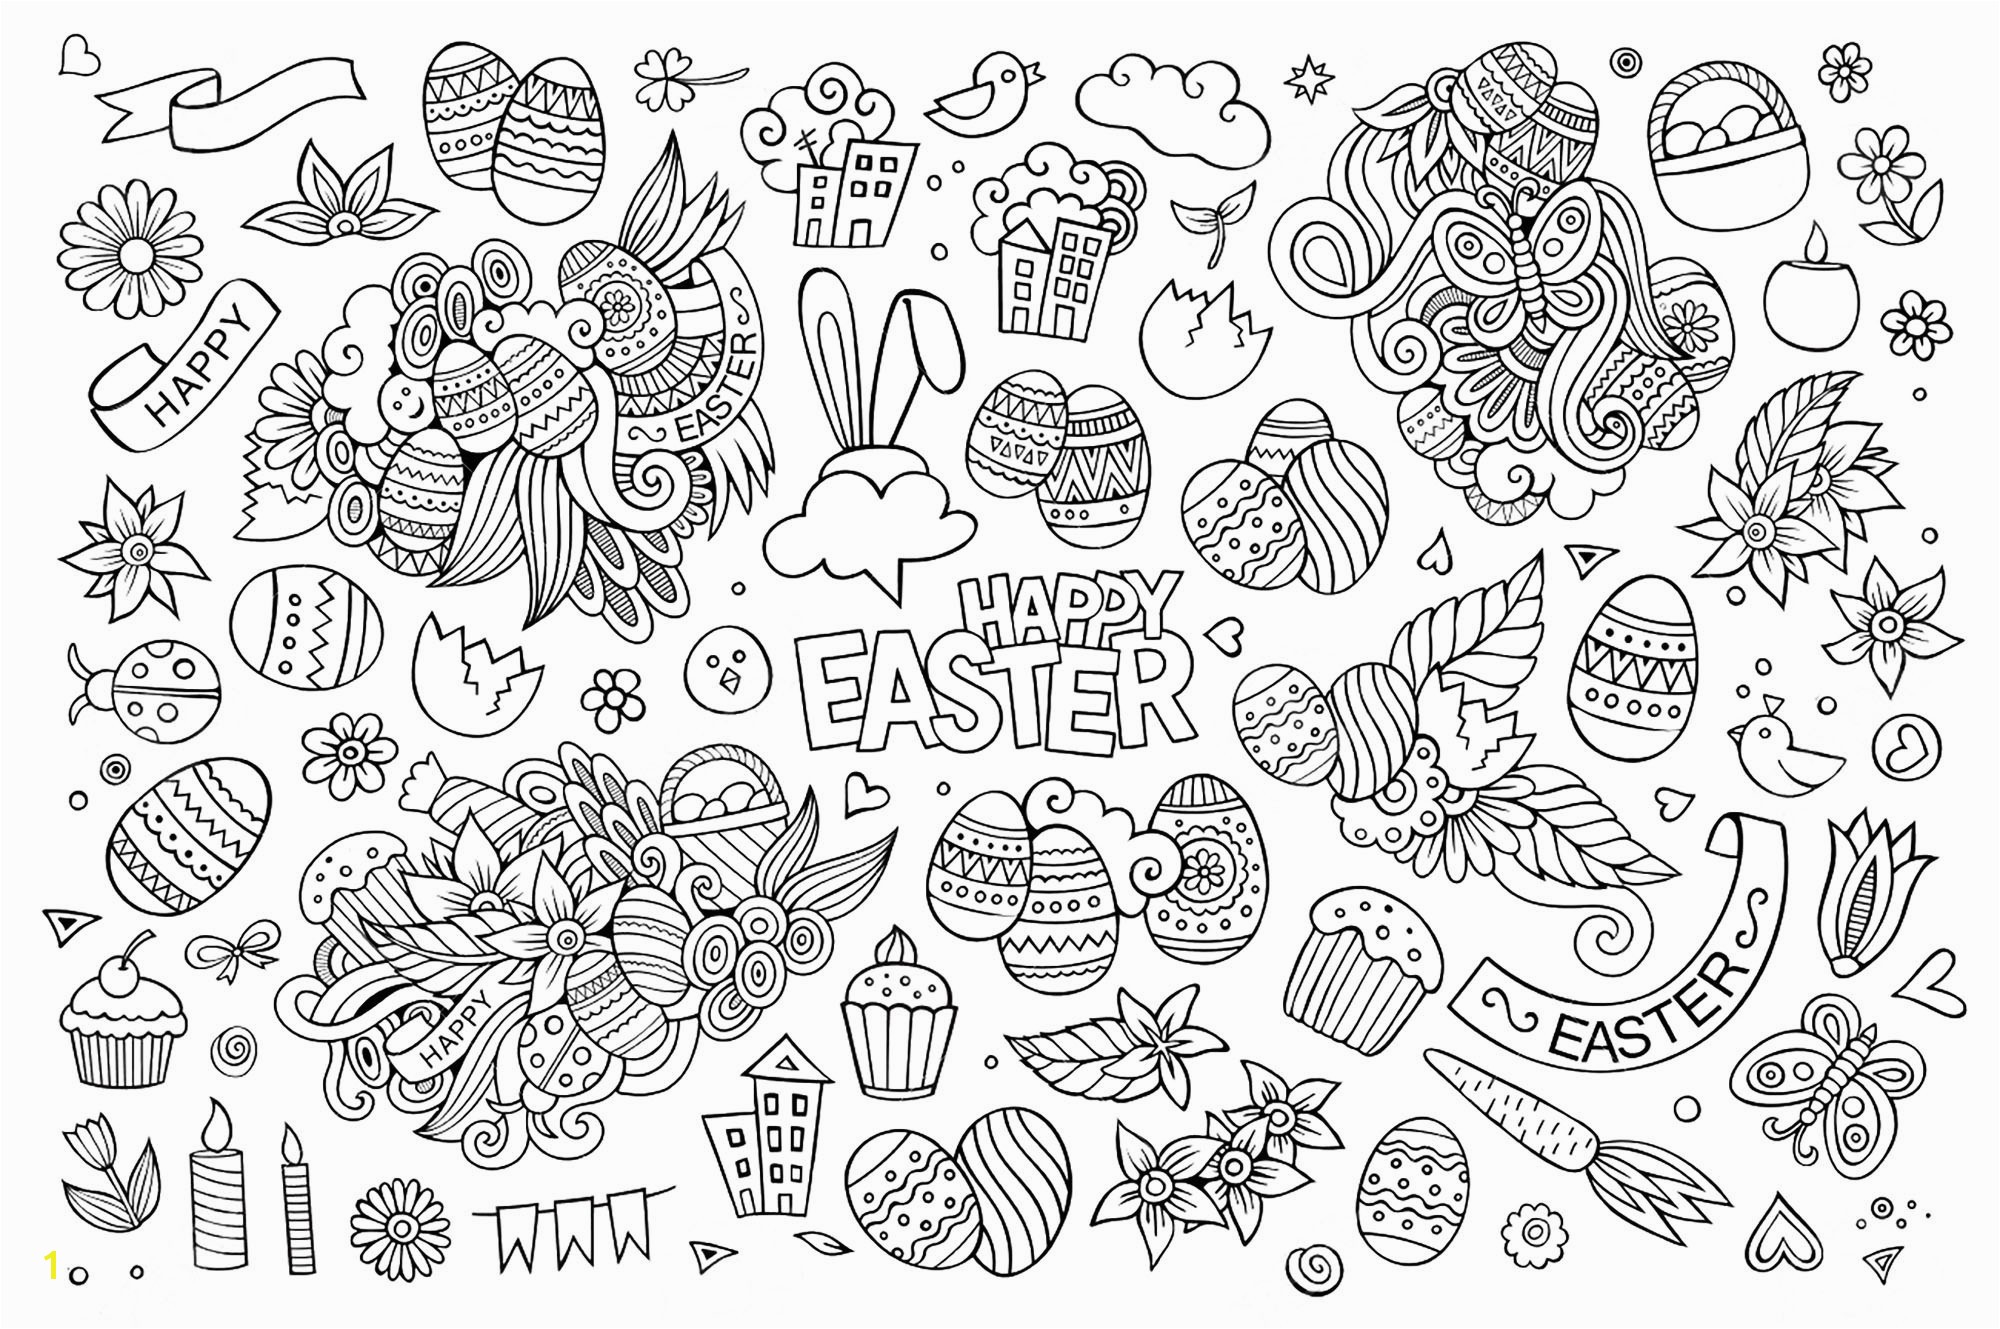 Religious Easter Coloring Pages Religious Easter Coloring Pages Jesus Resurrection Coloring Pages